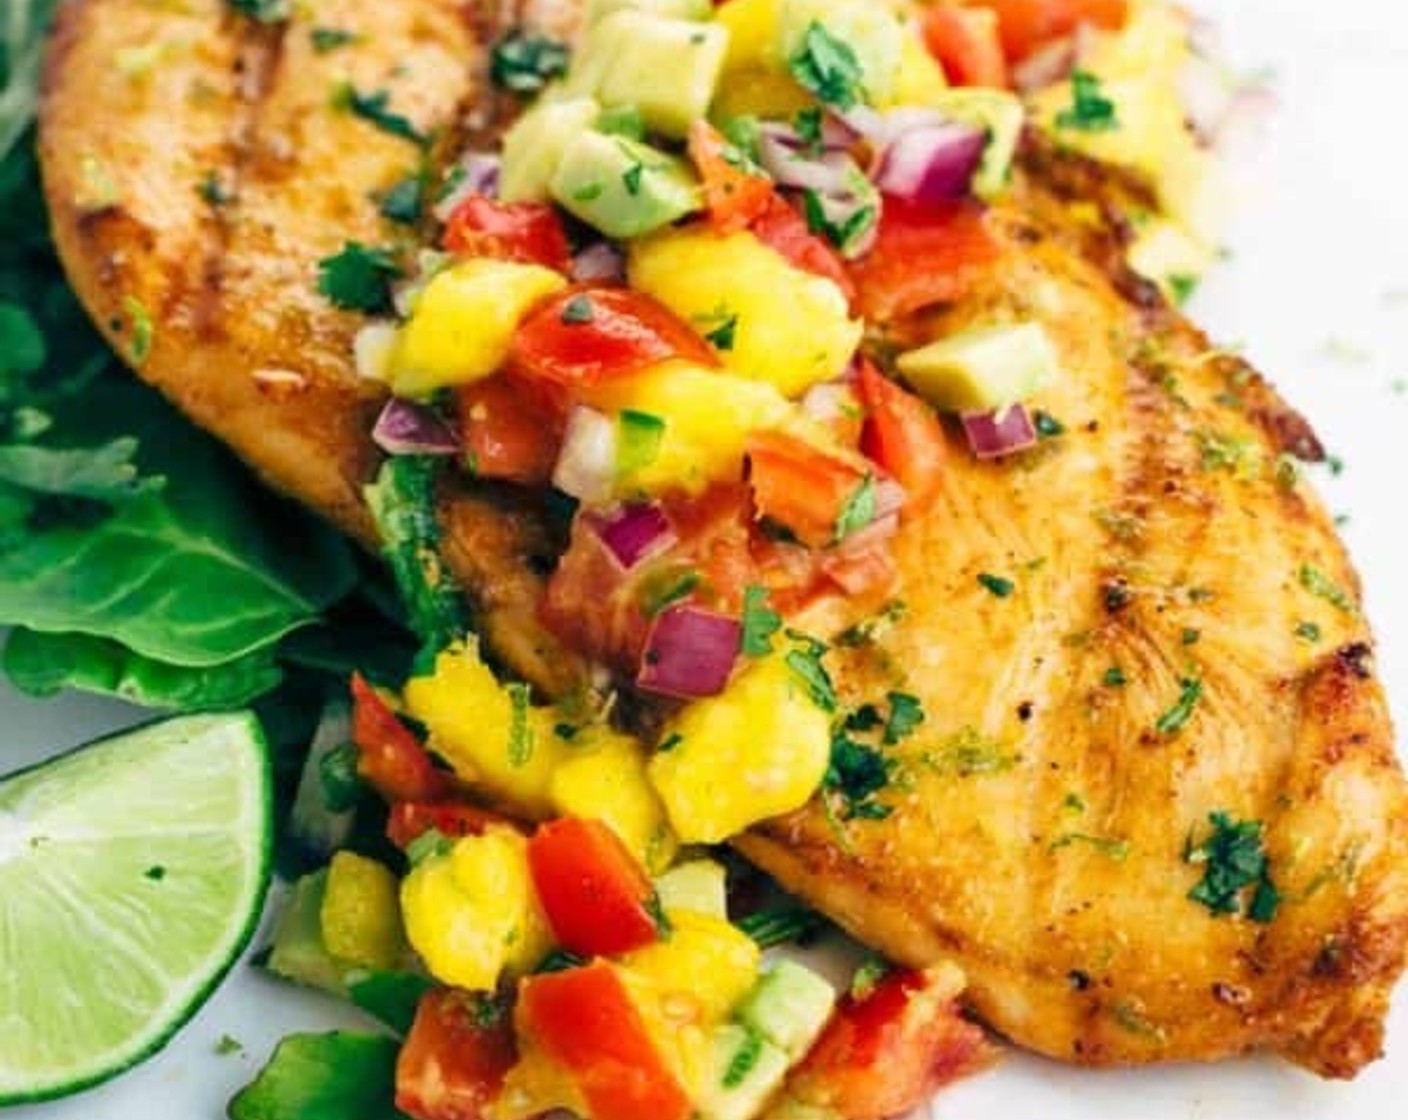 Grilled Tequila Lime Chicken with Mango Salsa